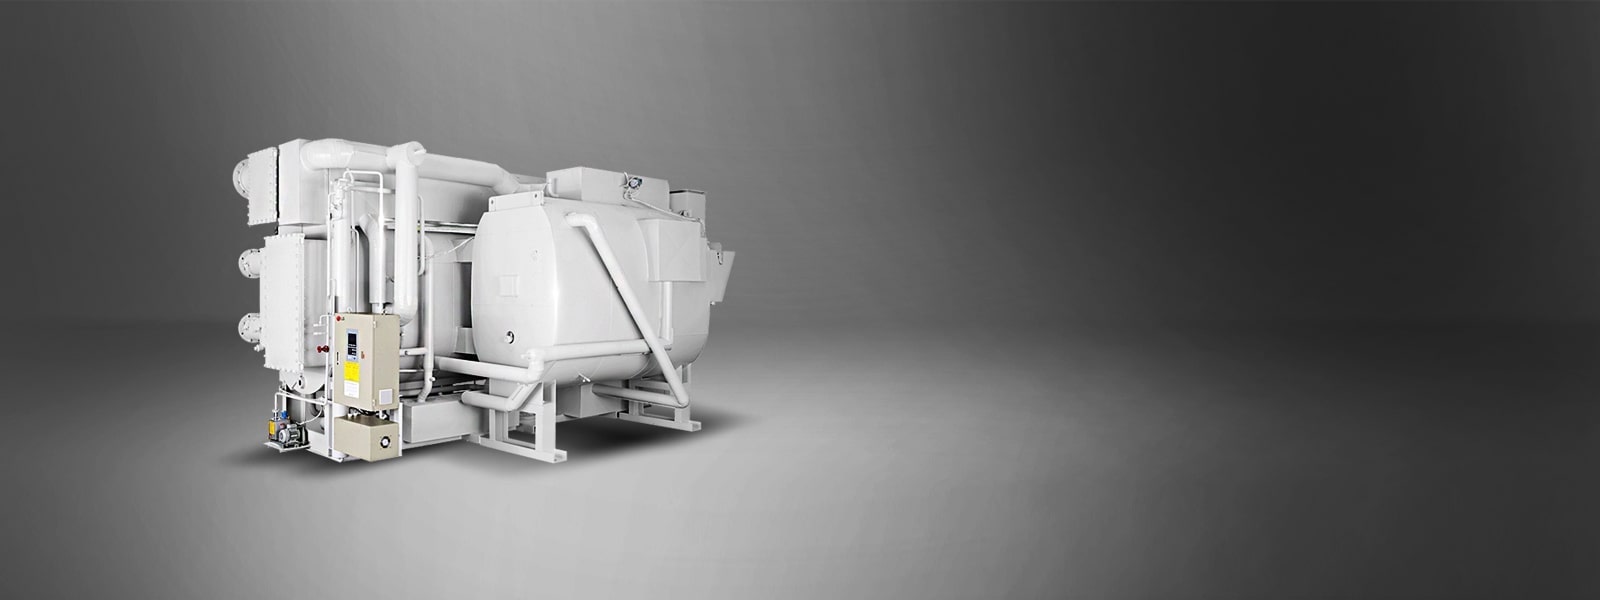 LG Absorption Chiller Direct Fired Type, showcased in a muted grey hue, consists of a series of linear and cylindrical pipe assemblies.